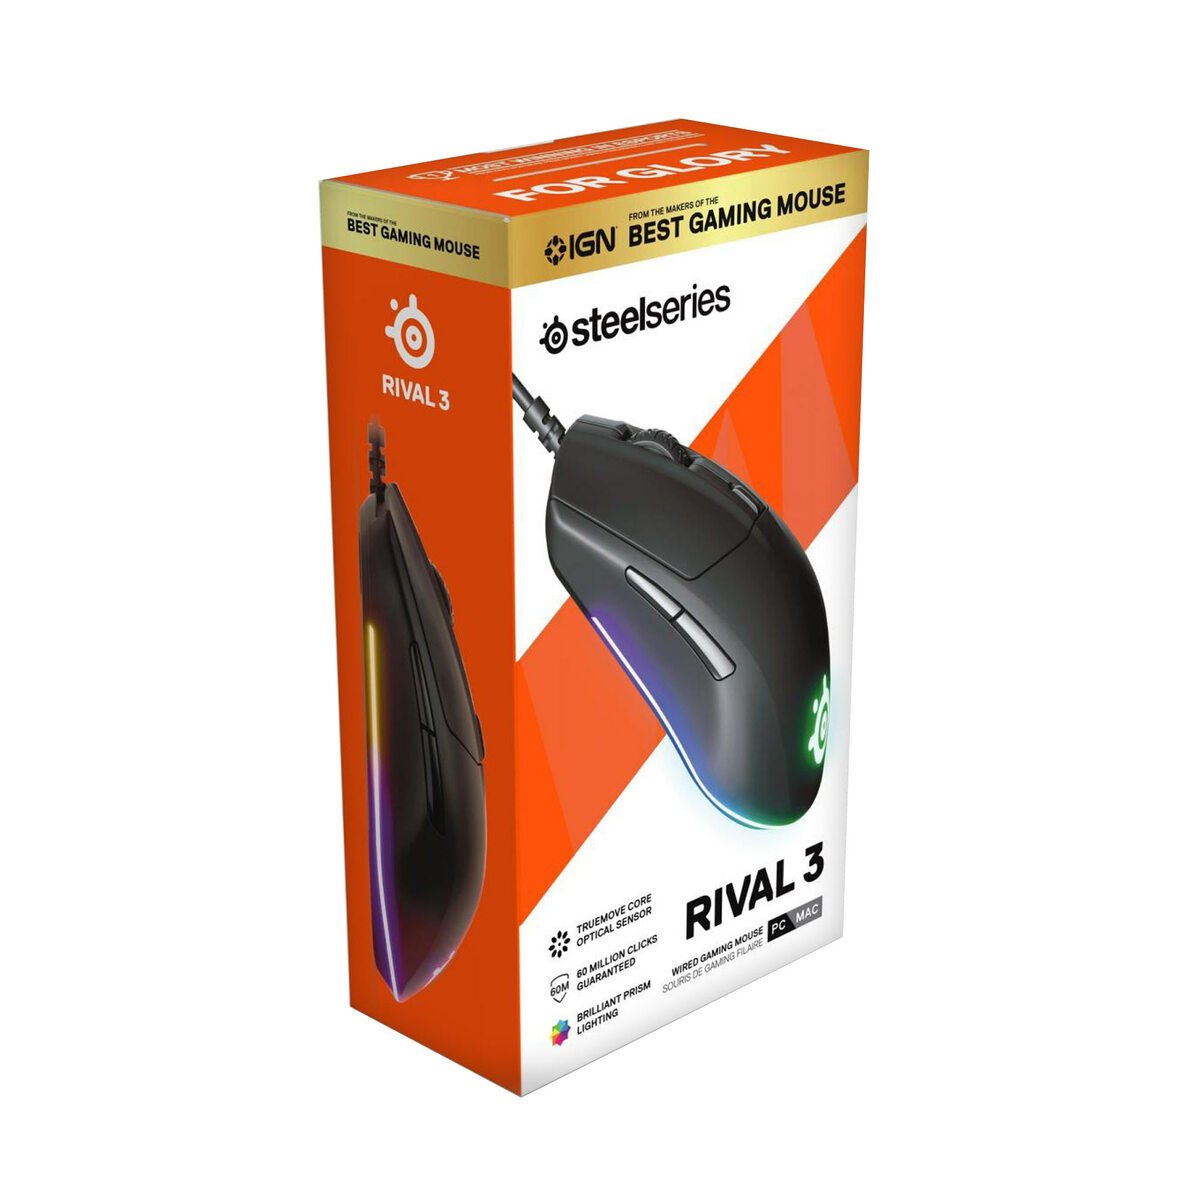 Steelseries Rival 3 Wired Gaming Mouse 62513